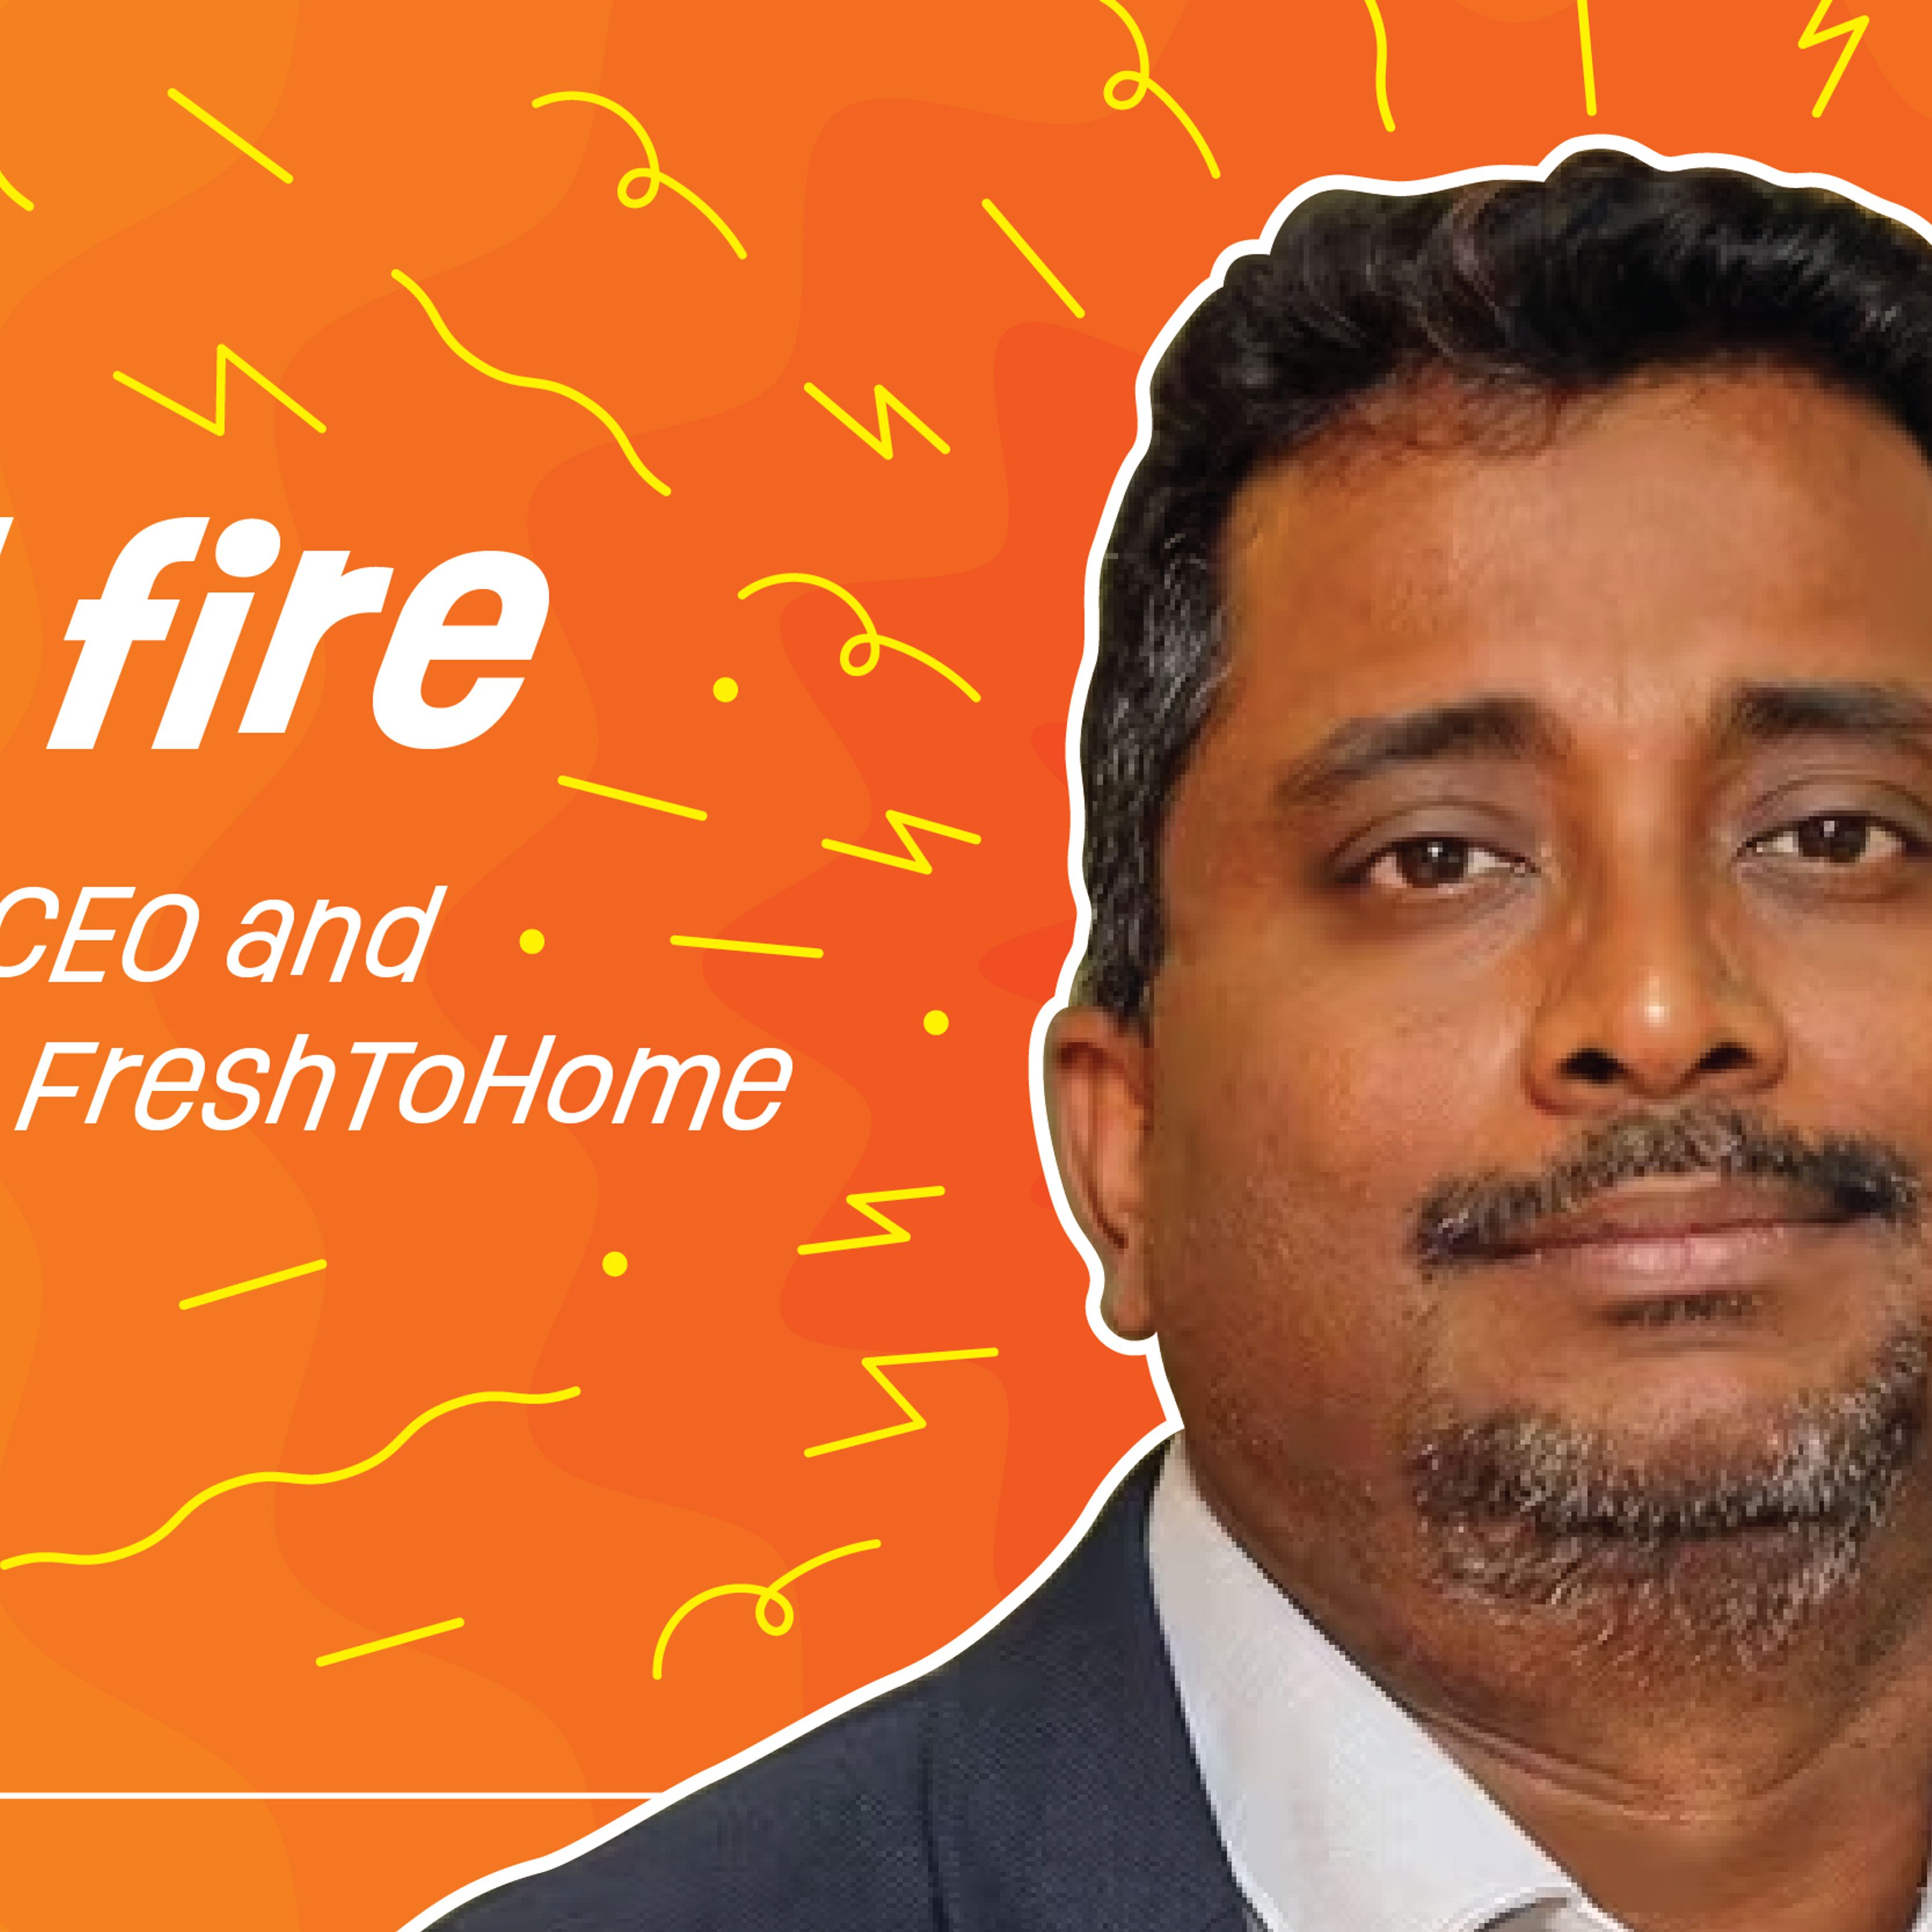 Rapid fire with YS Life: Shan Kadavil, CEO and Co-founder at FreshToHome 